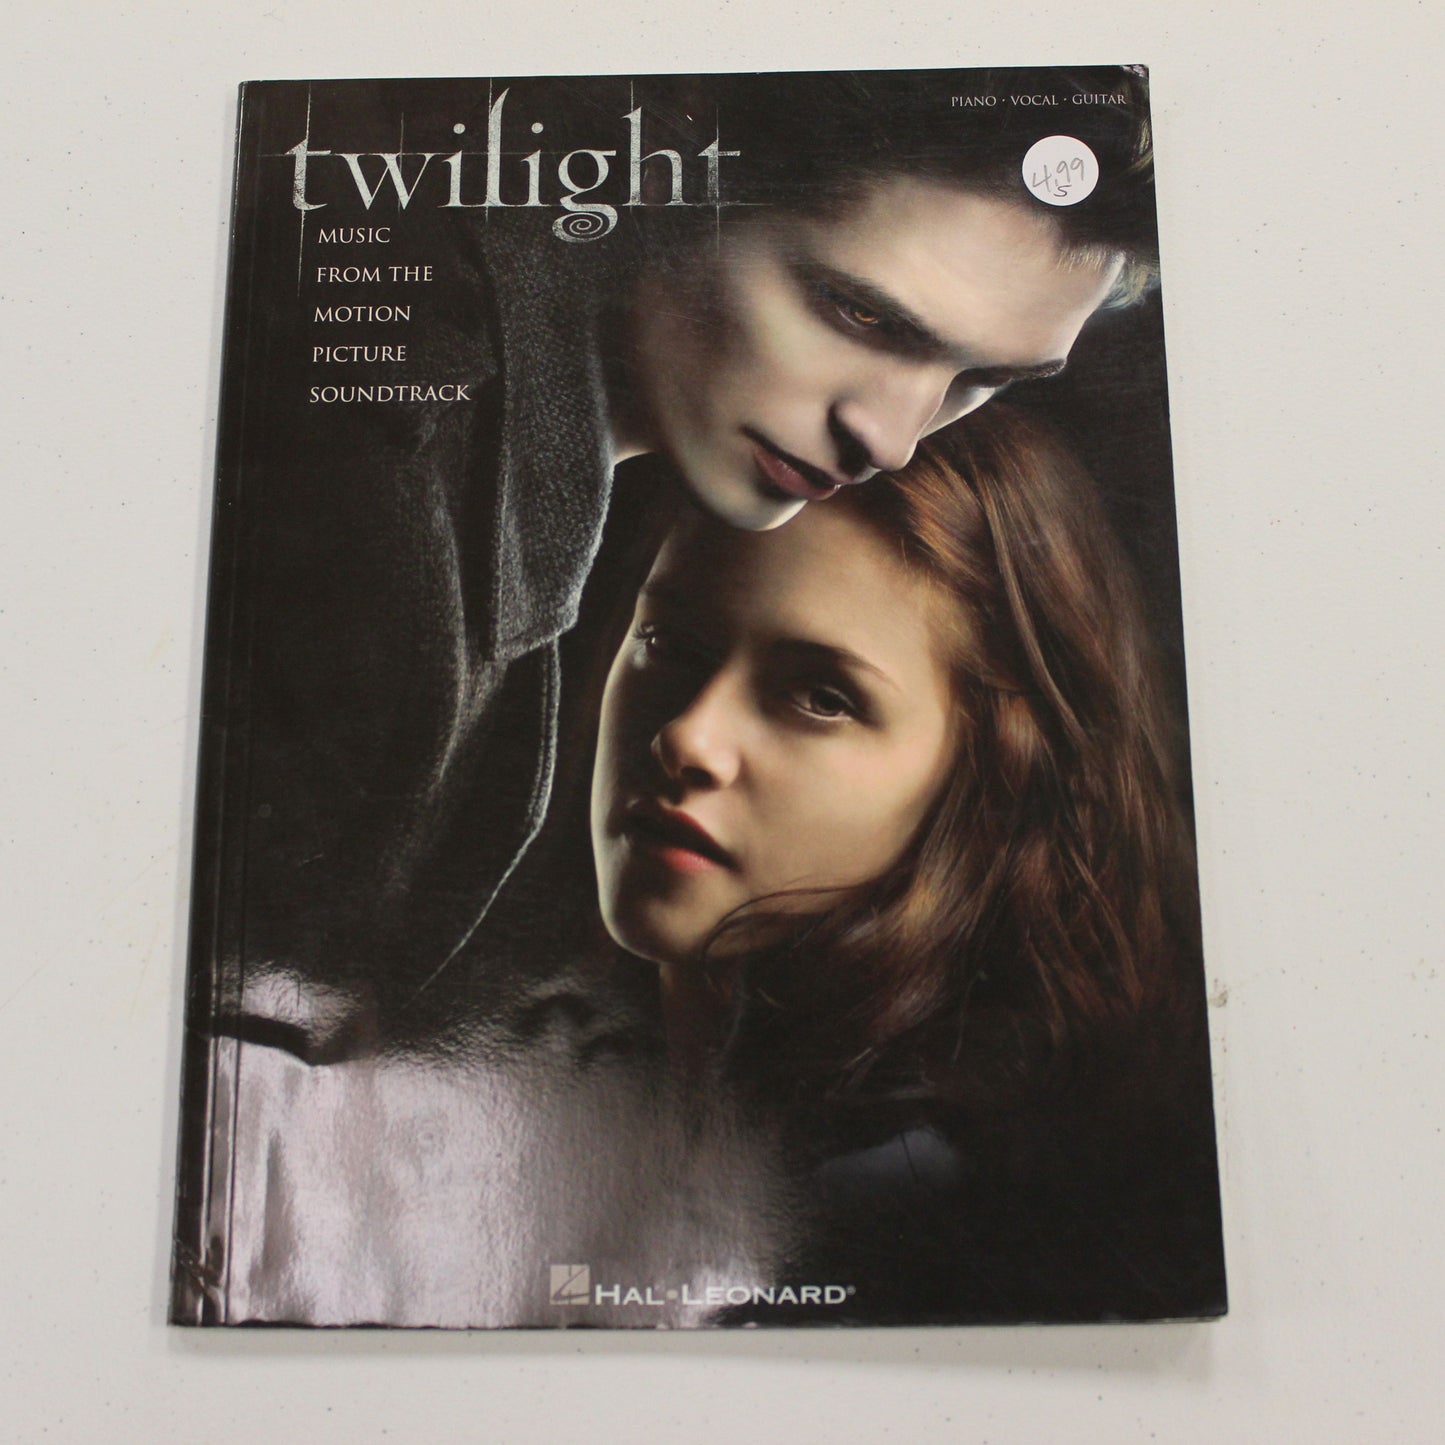 TWILIGHT: MUSIC FROM THE MOTION PICTURE